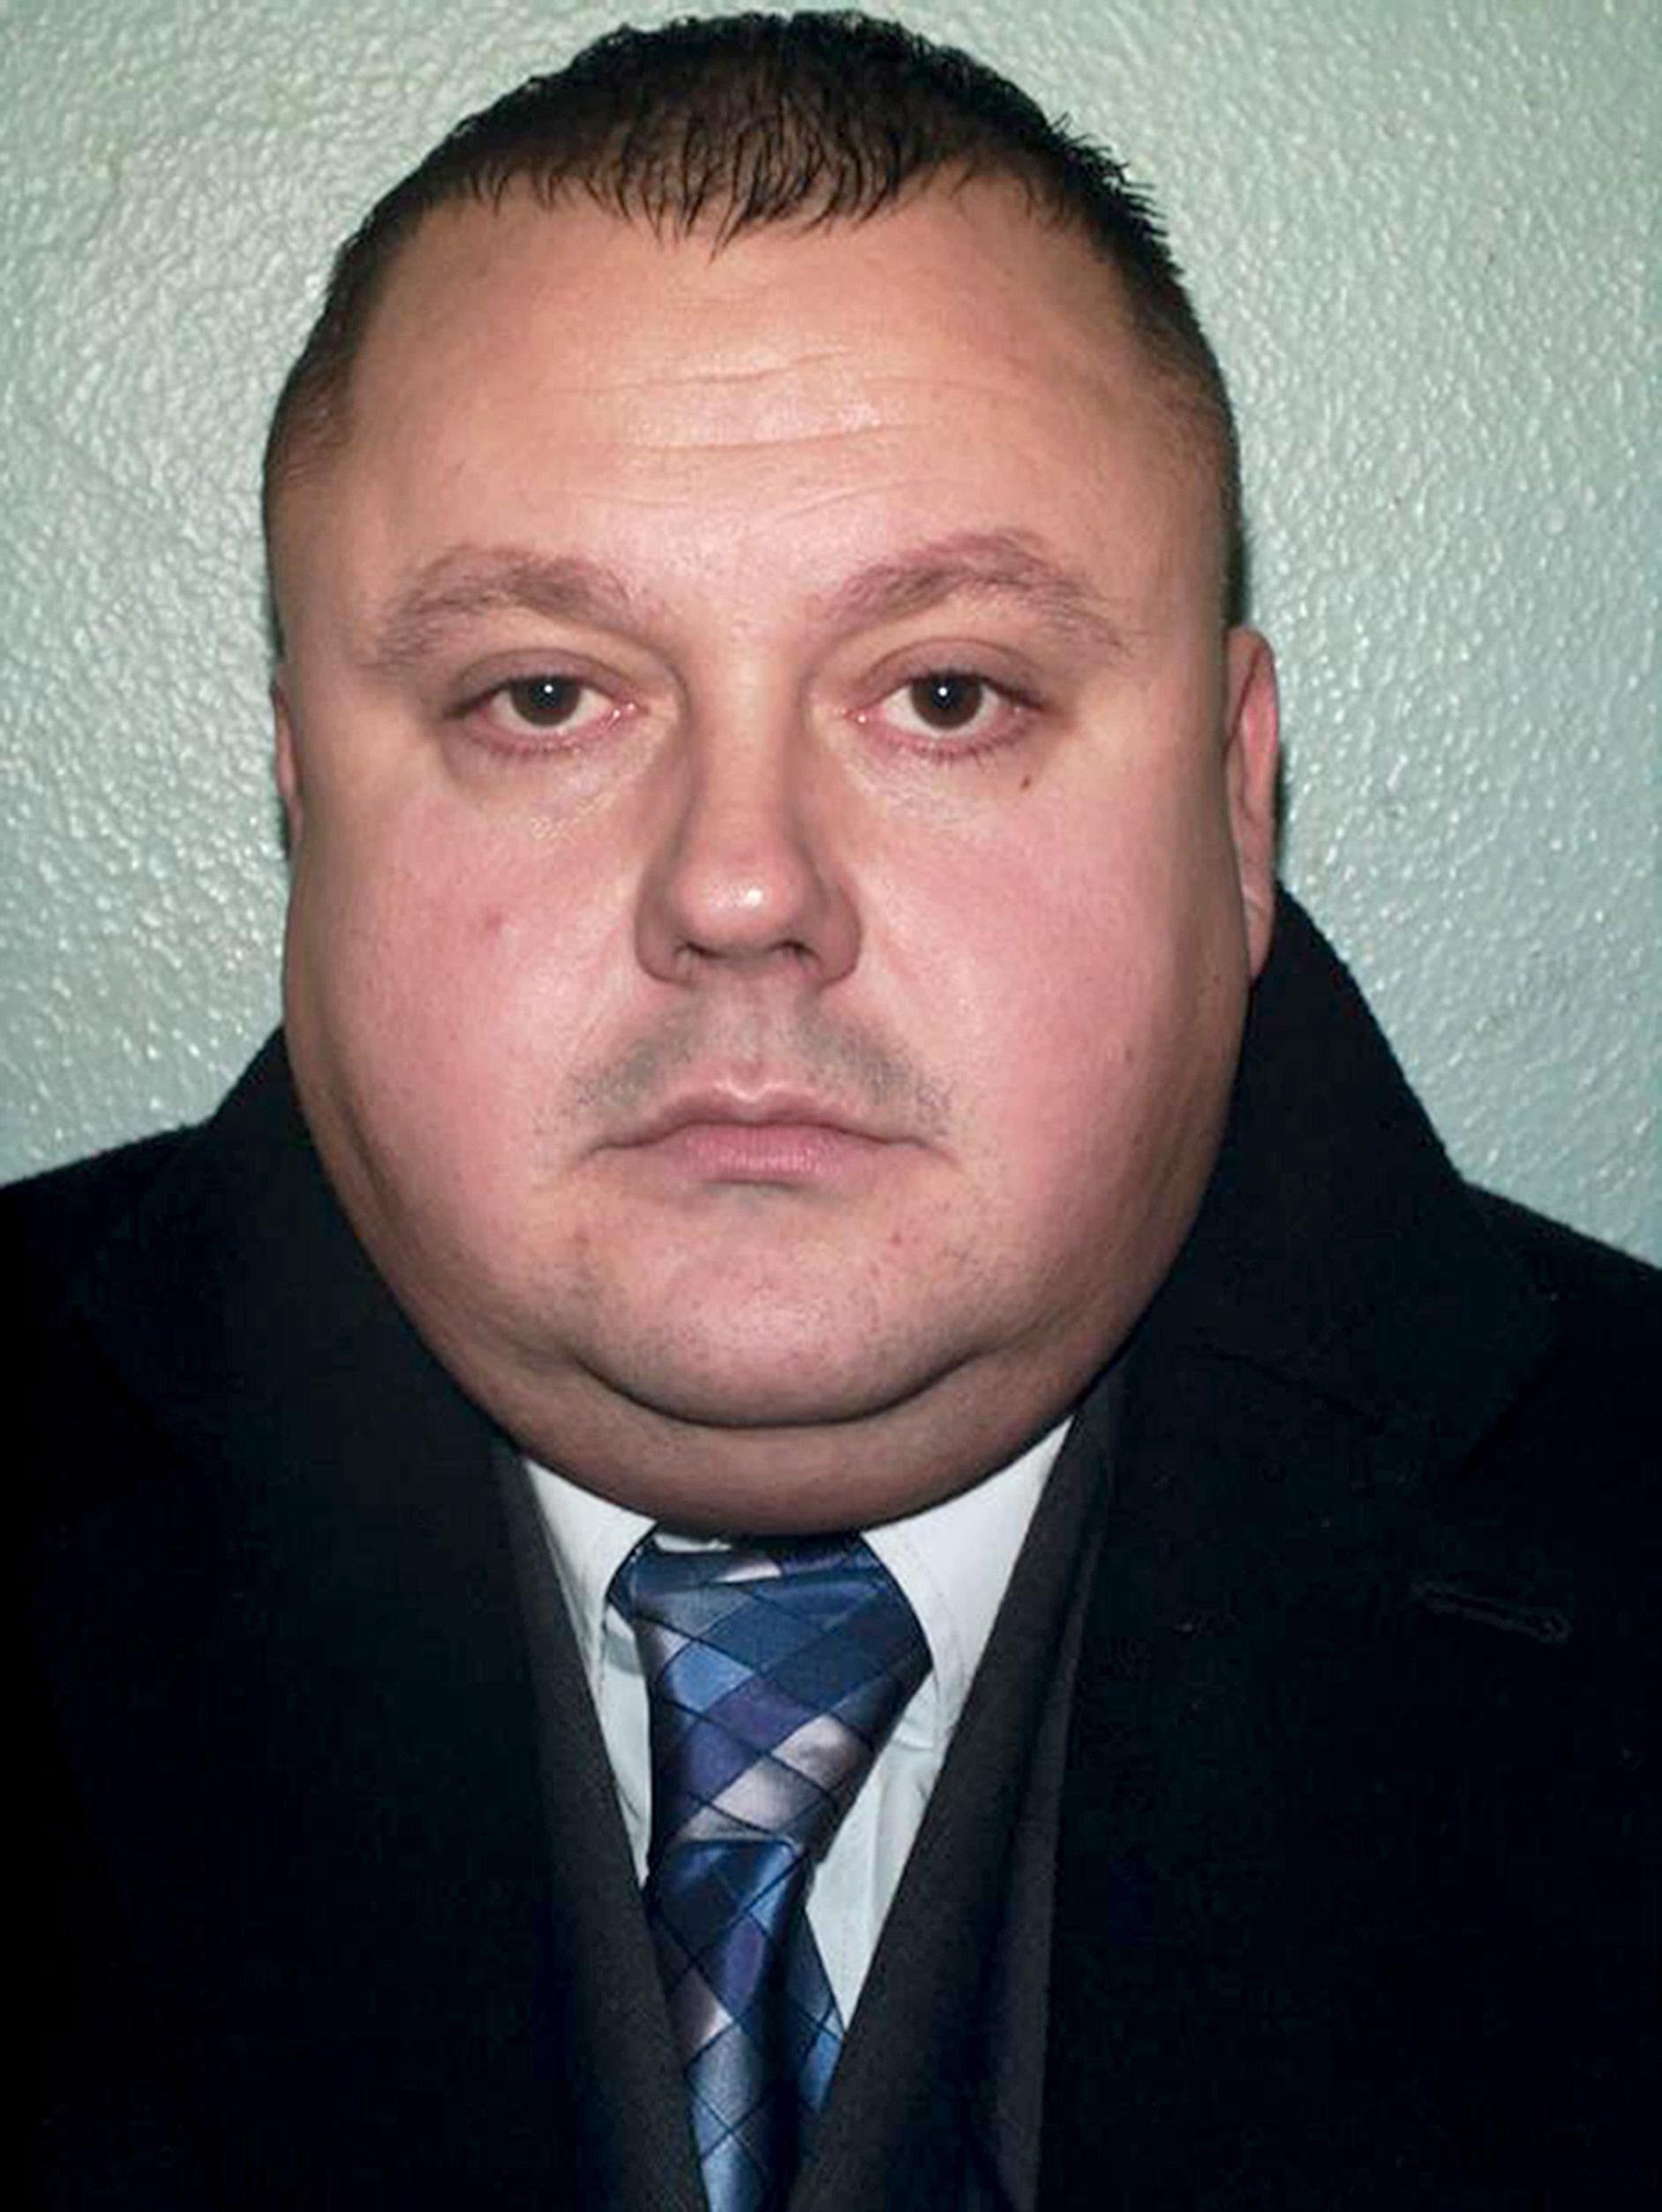 Serial killer Levi Bellfield’s request to get married in prison is “inconceivable” unless serious safeguarding concerns are addressed, Dominic Raab says